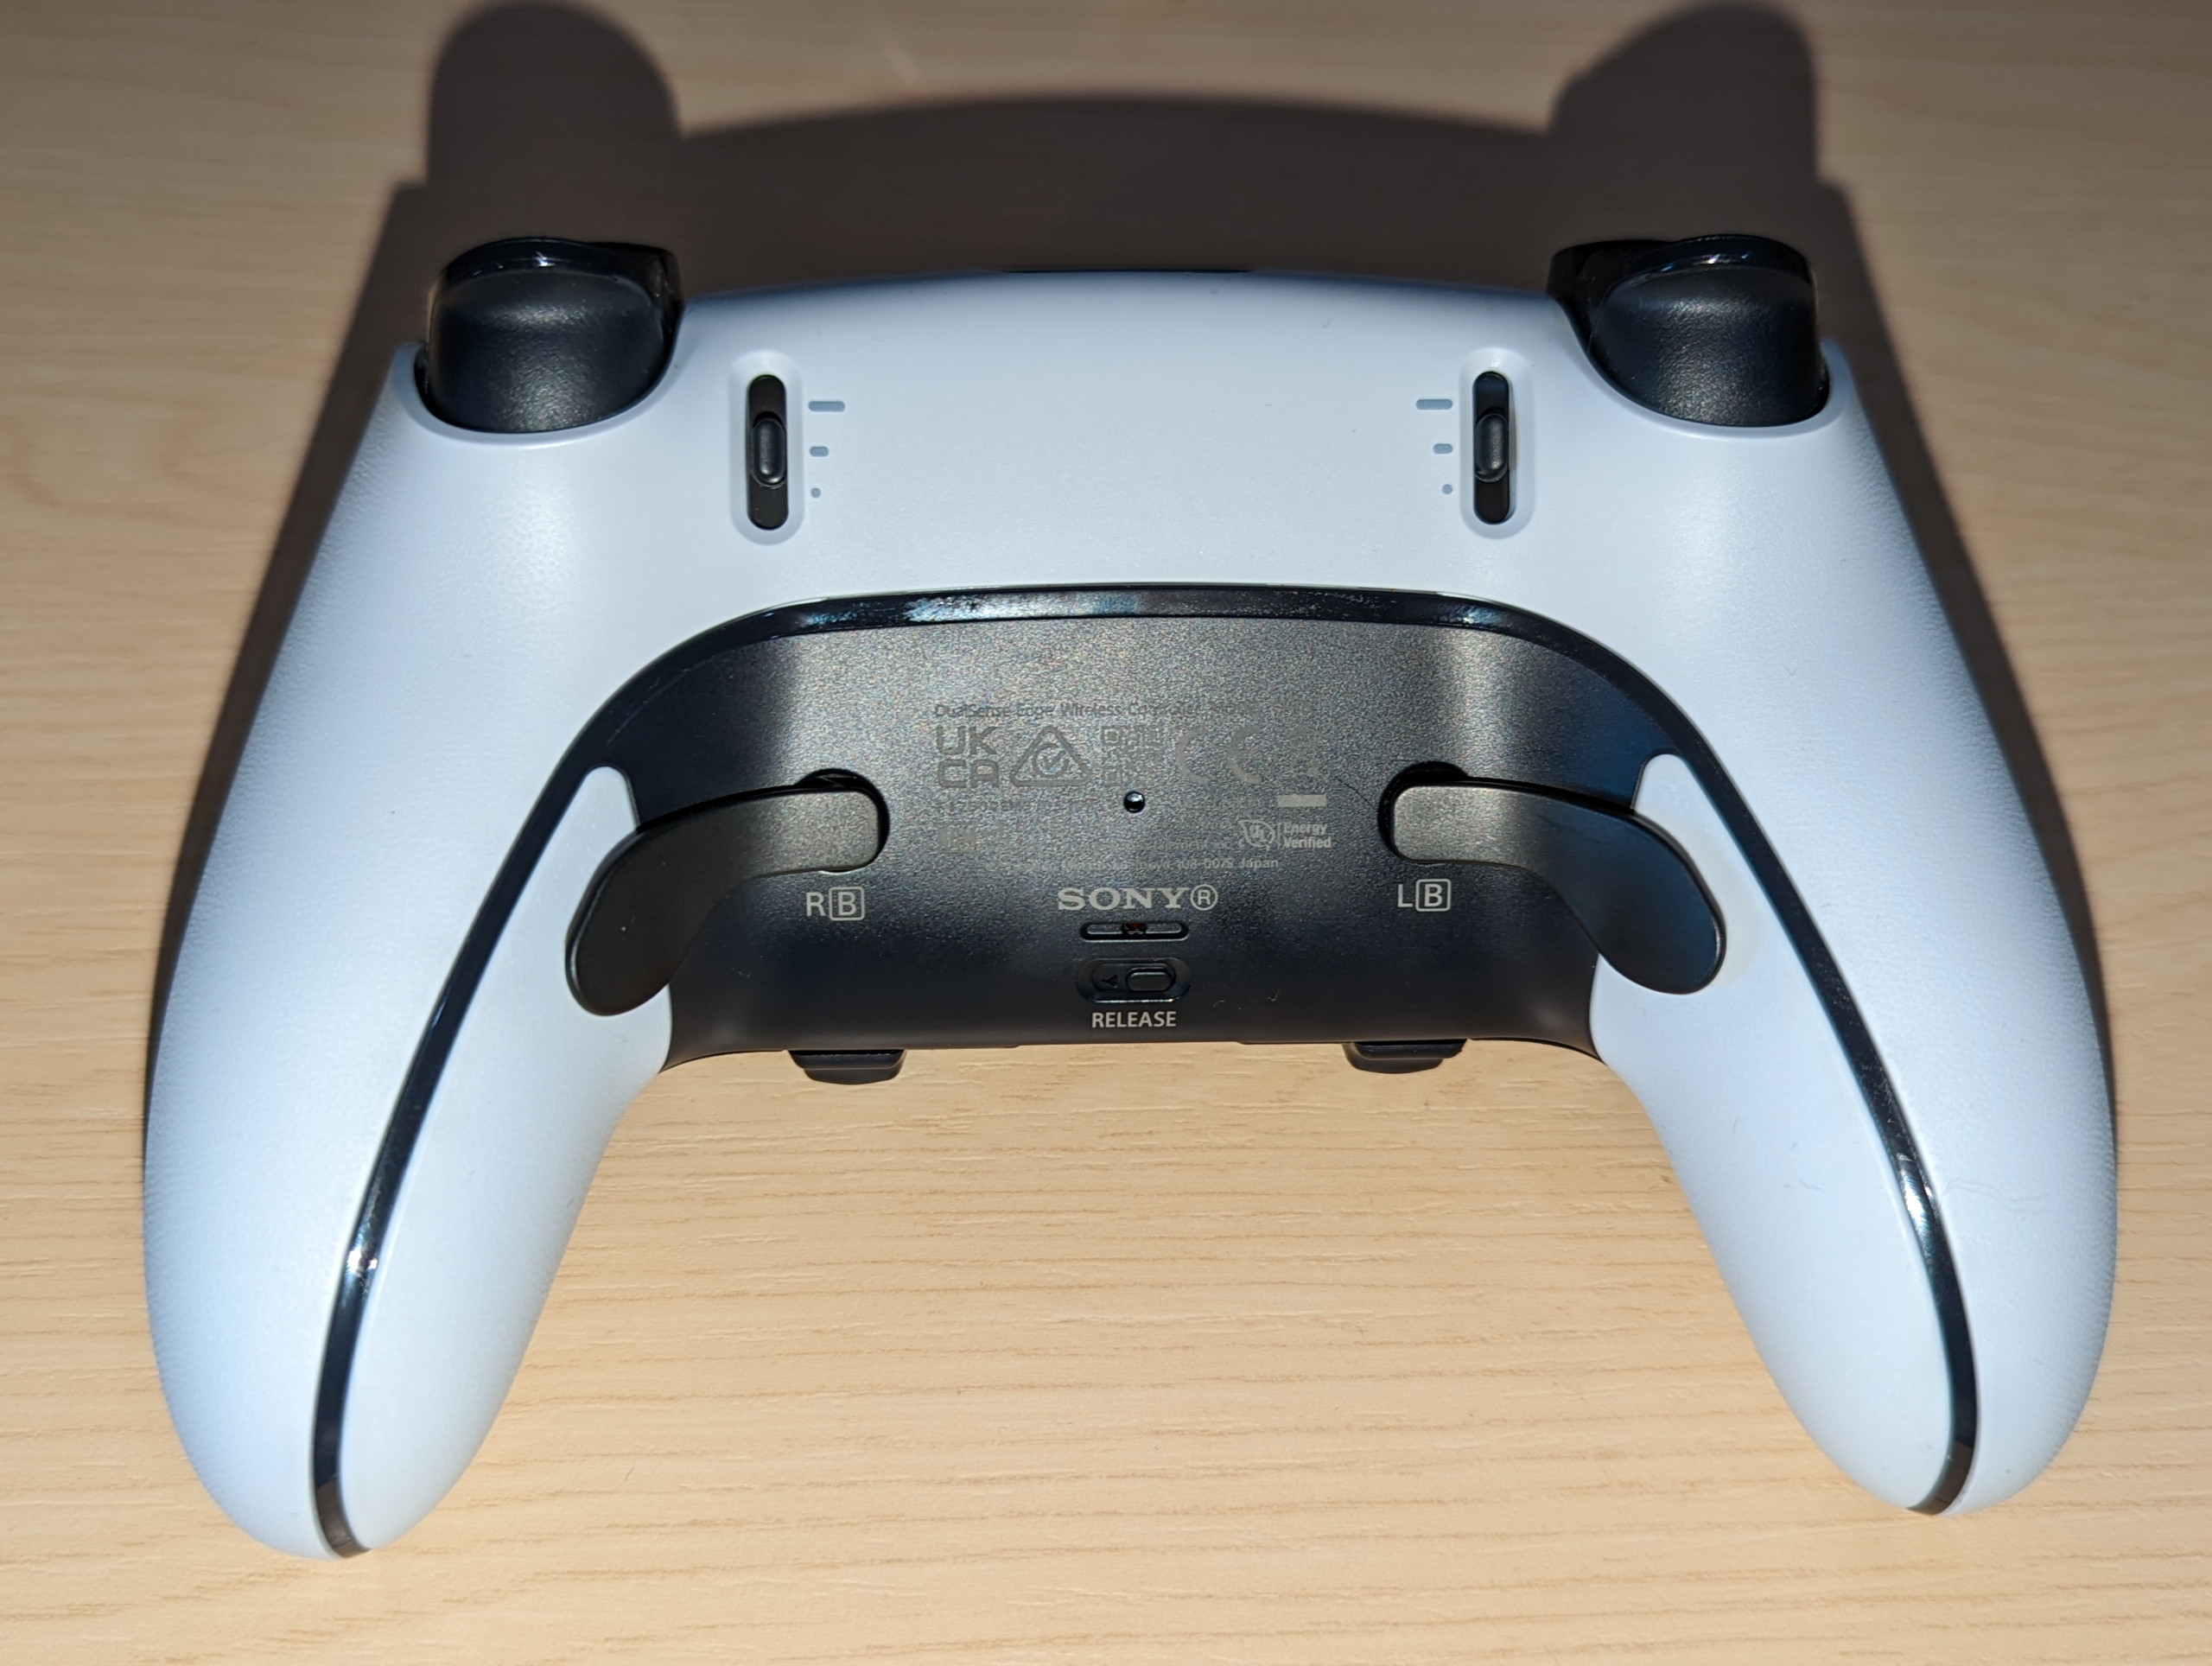 Back on the Dualsense Edge controller, showing the trigger adjustment sliders and the optional back buttons